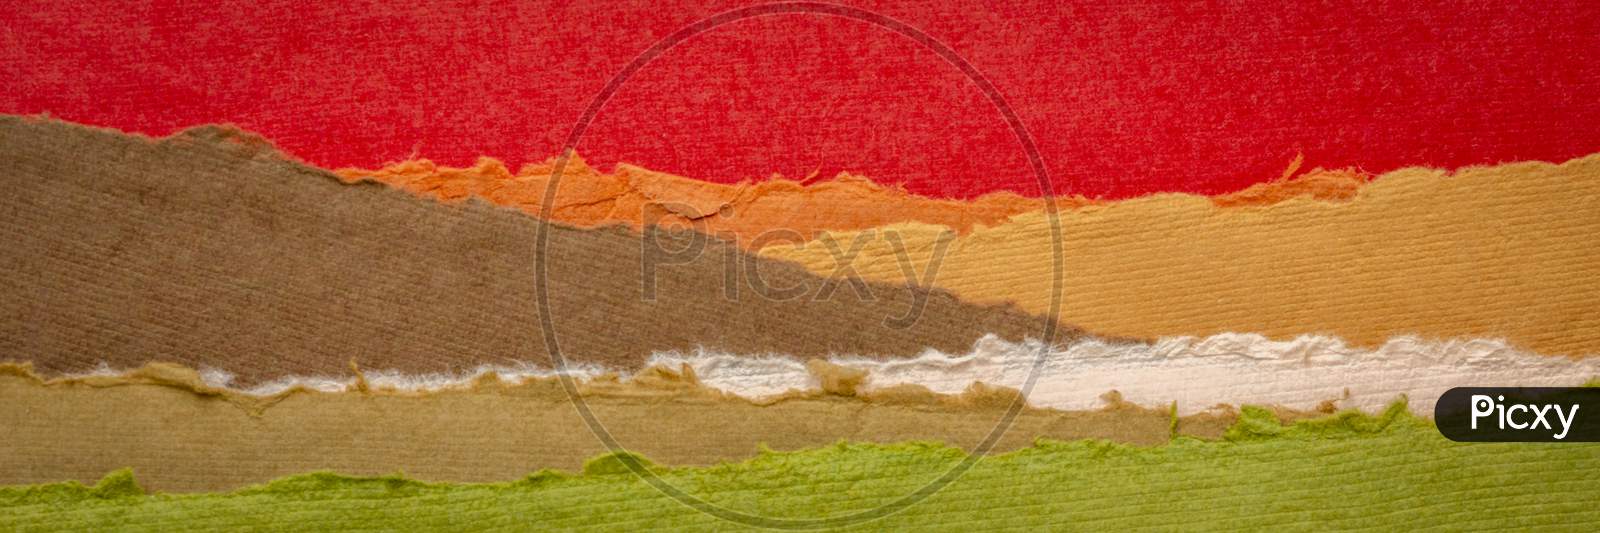 Red Sunset Or Sunrise Over Green Fields Abstract Panorama Landscape  - A Collection Of Colorful Handmade Indian Papers Produced From Recycled Cotton Fabric